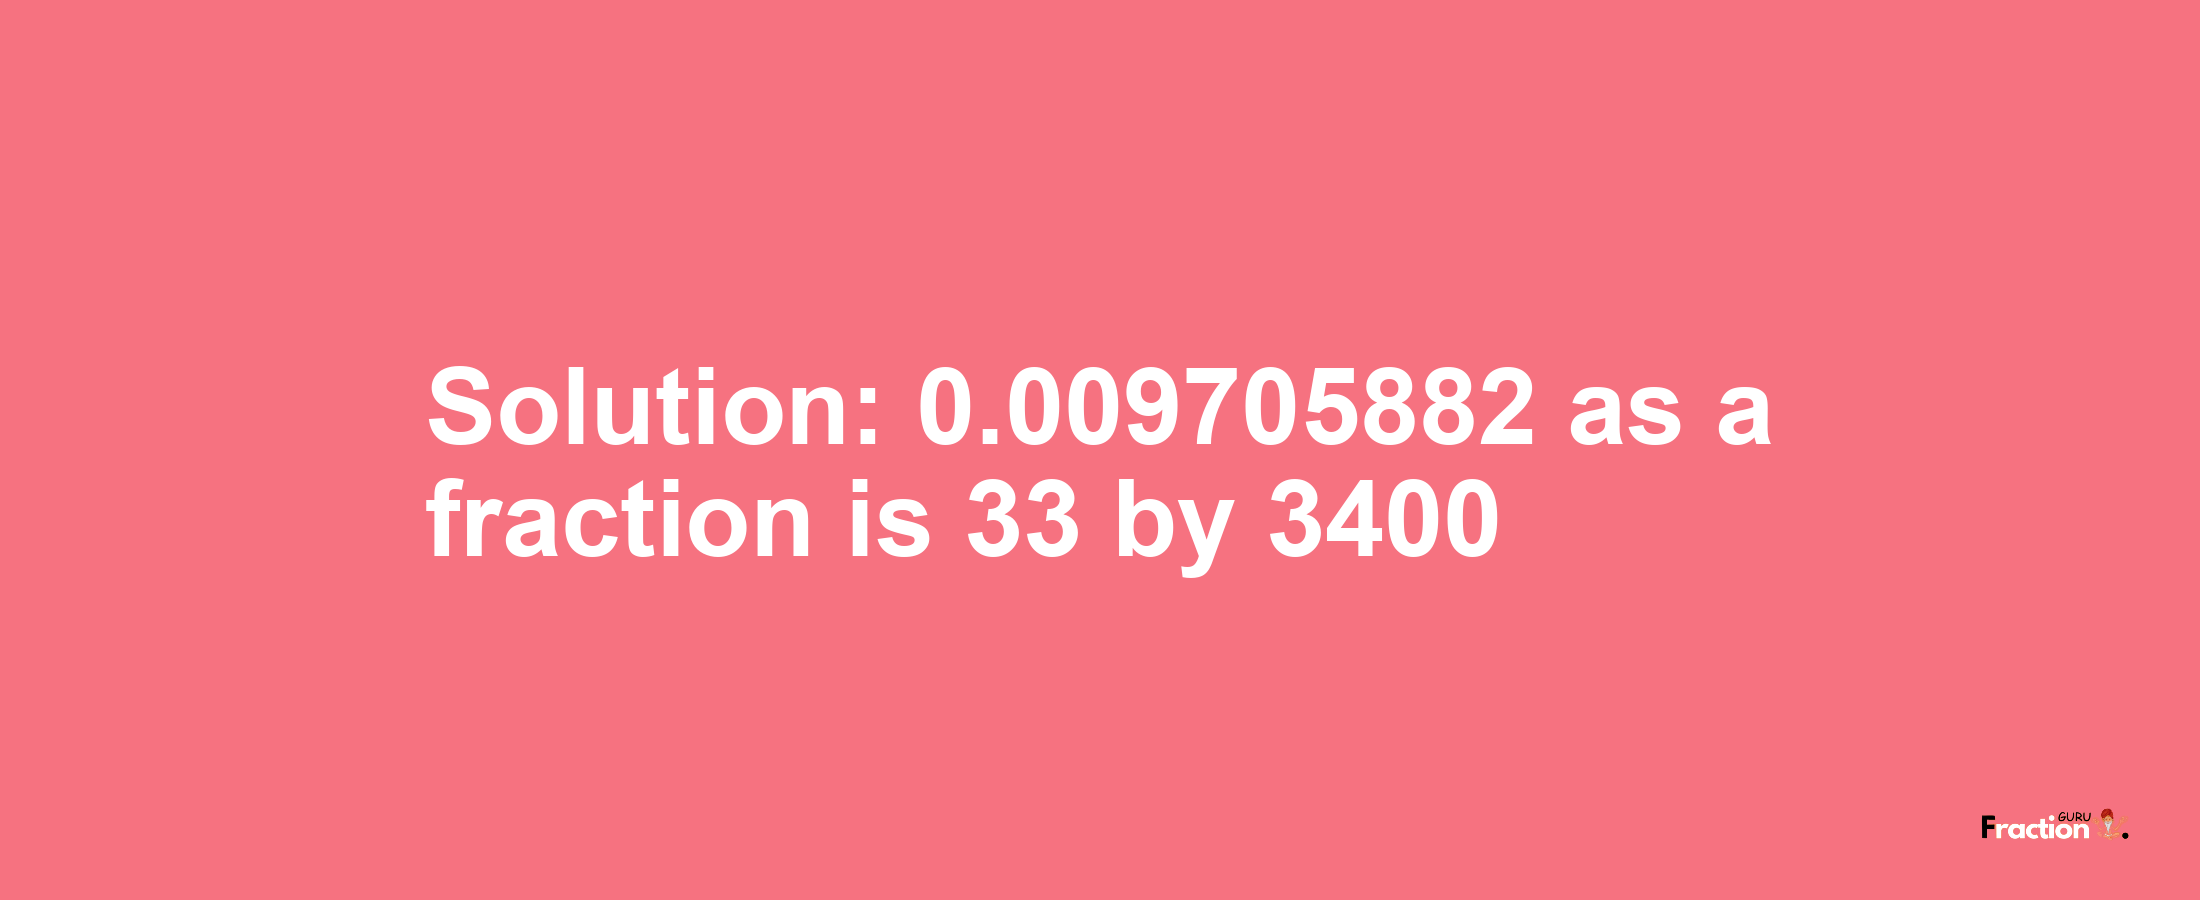 Solution:0.009705882 as a fraction is 33/3400